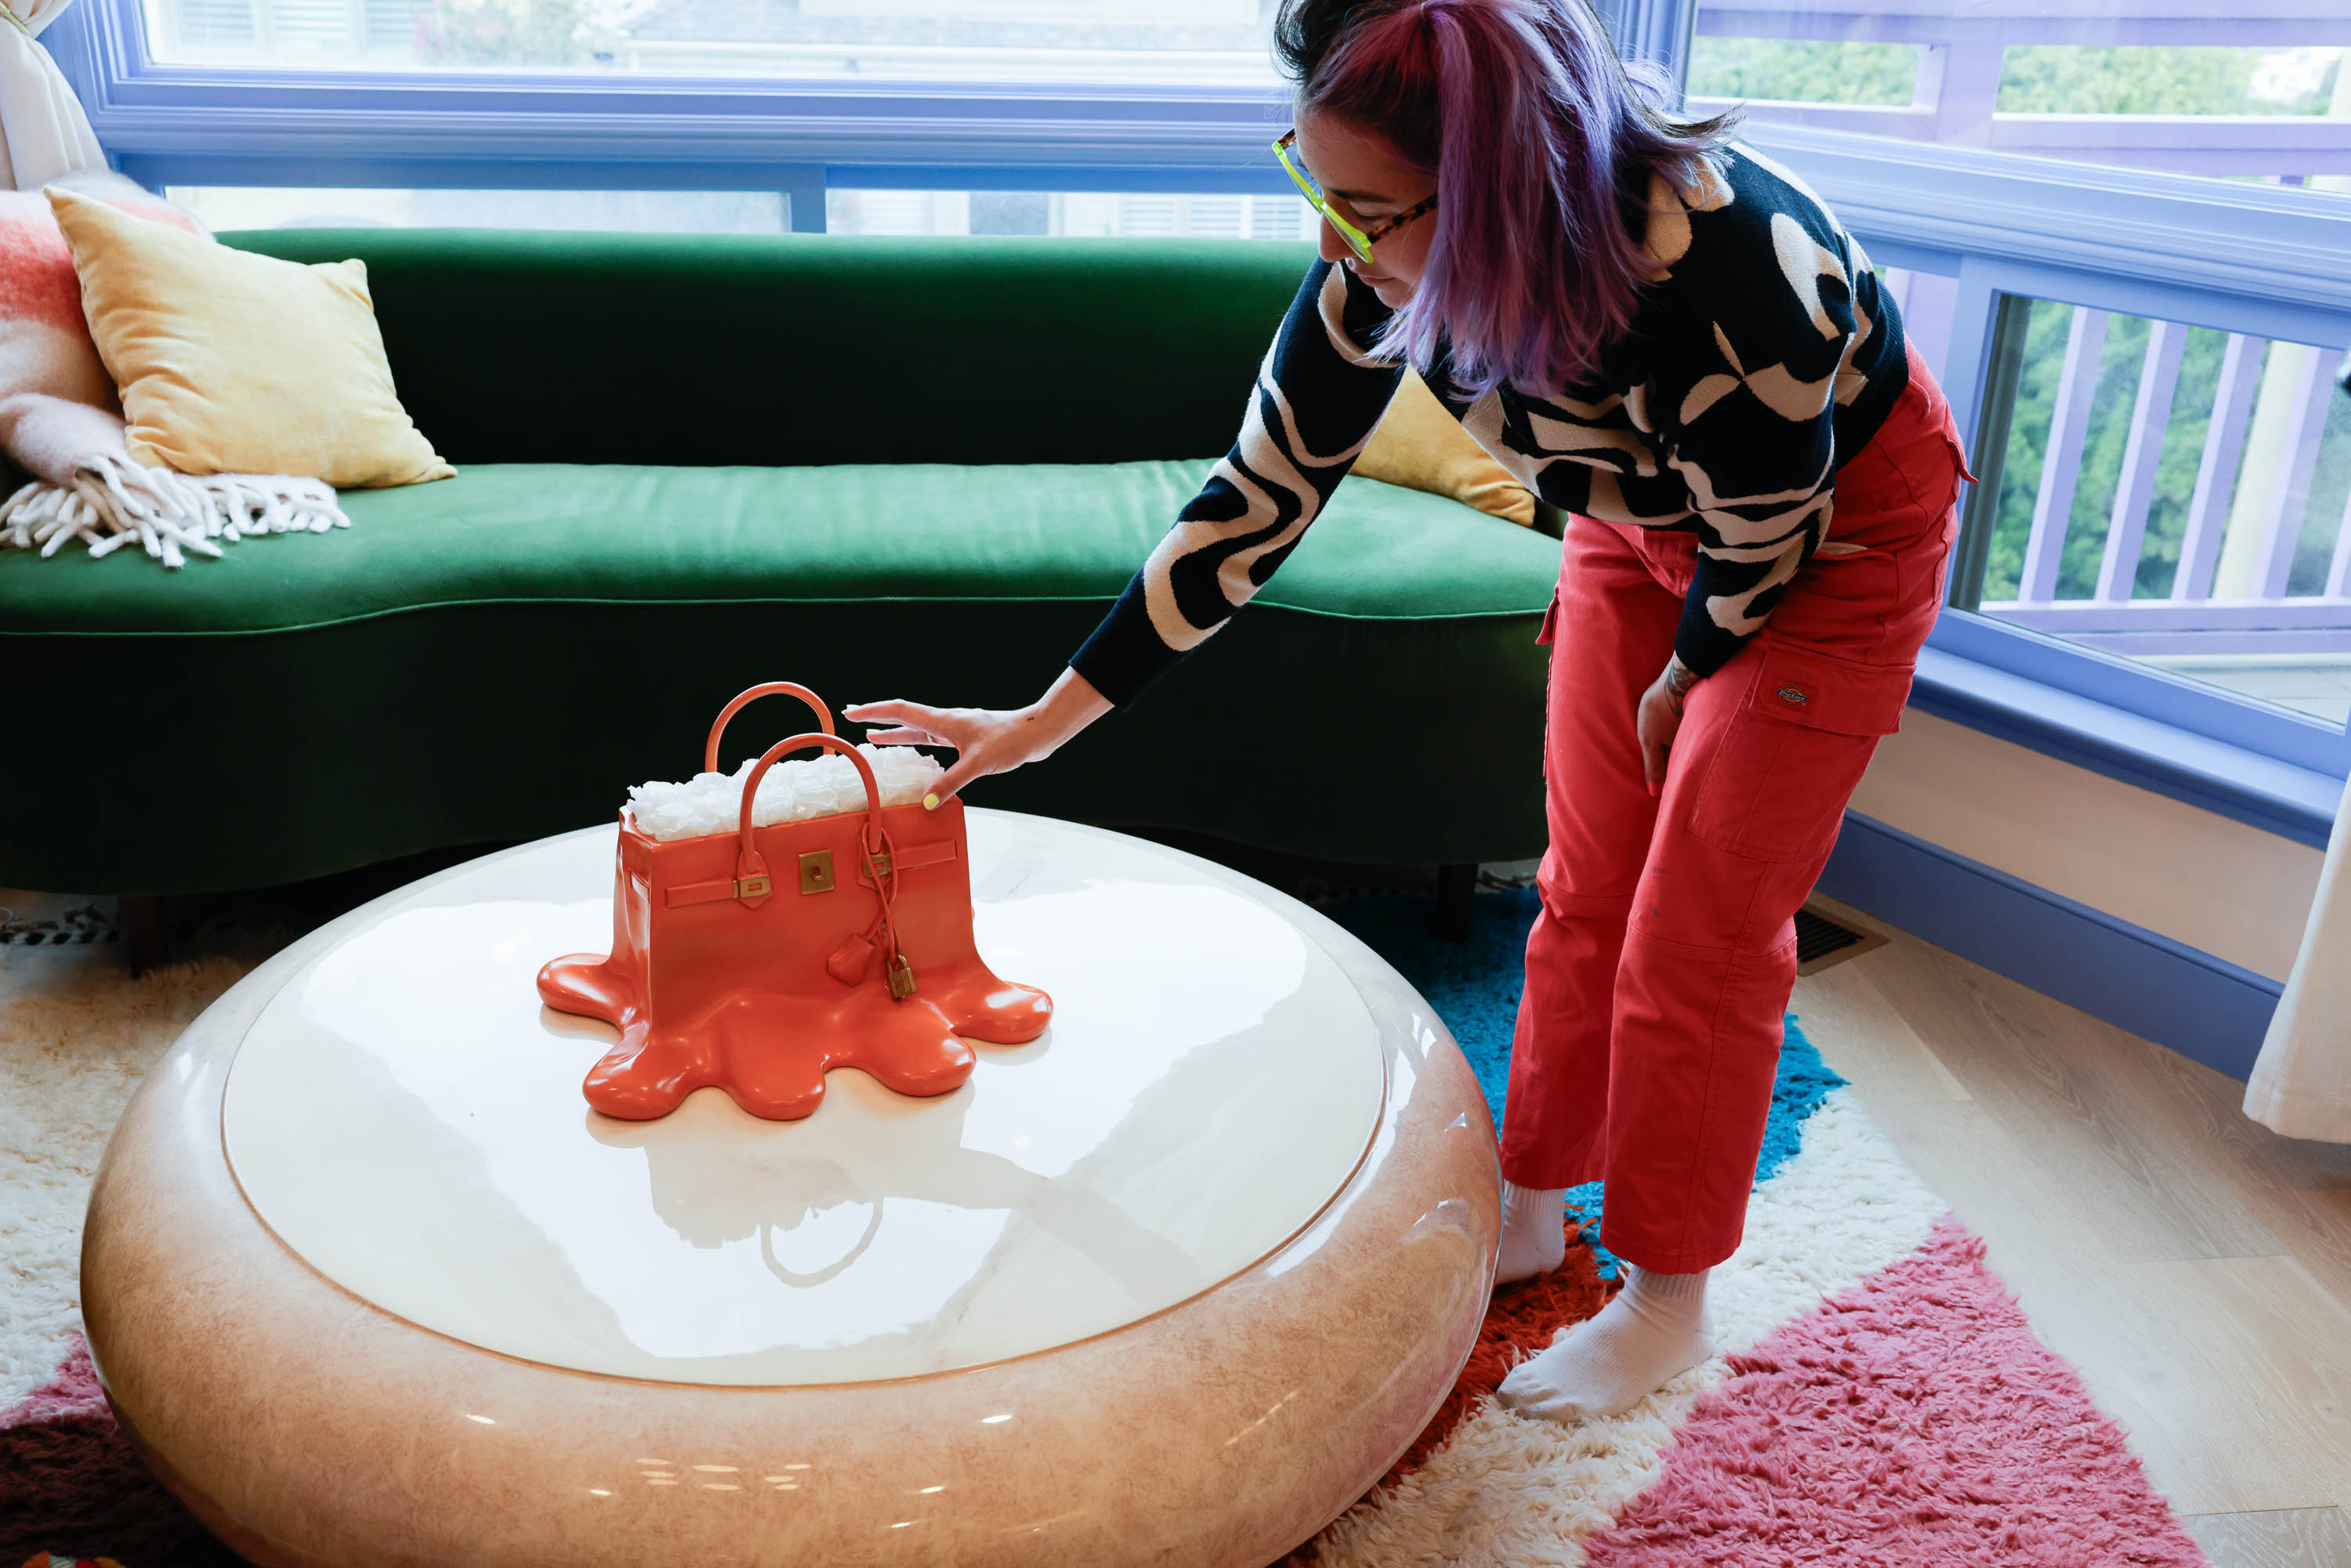 A person with colorful hair touches a melting, red purse sculpture on a round table, beside a green sofa with pillows.